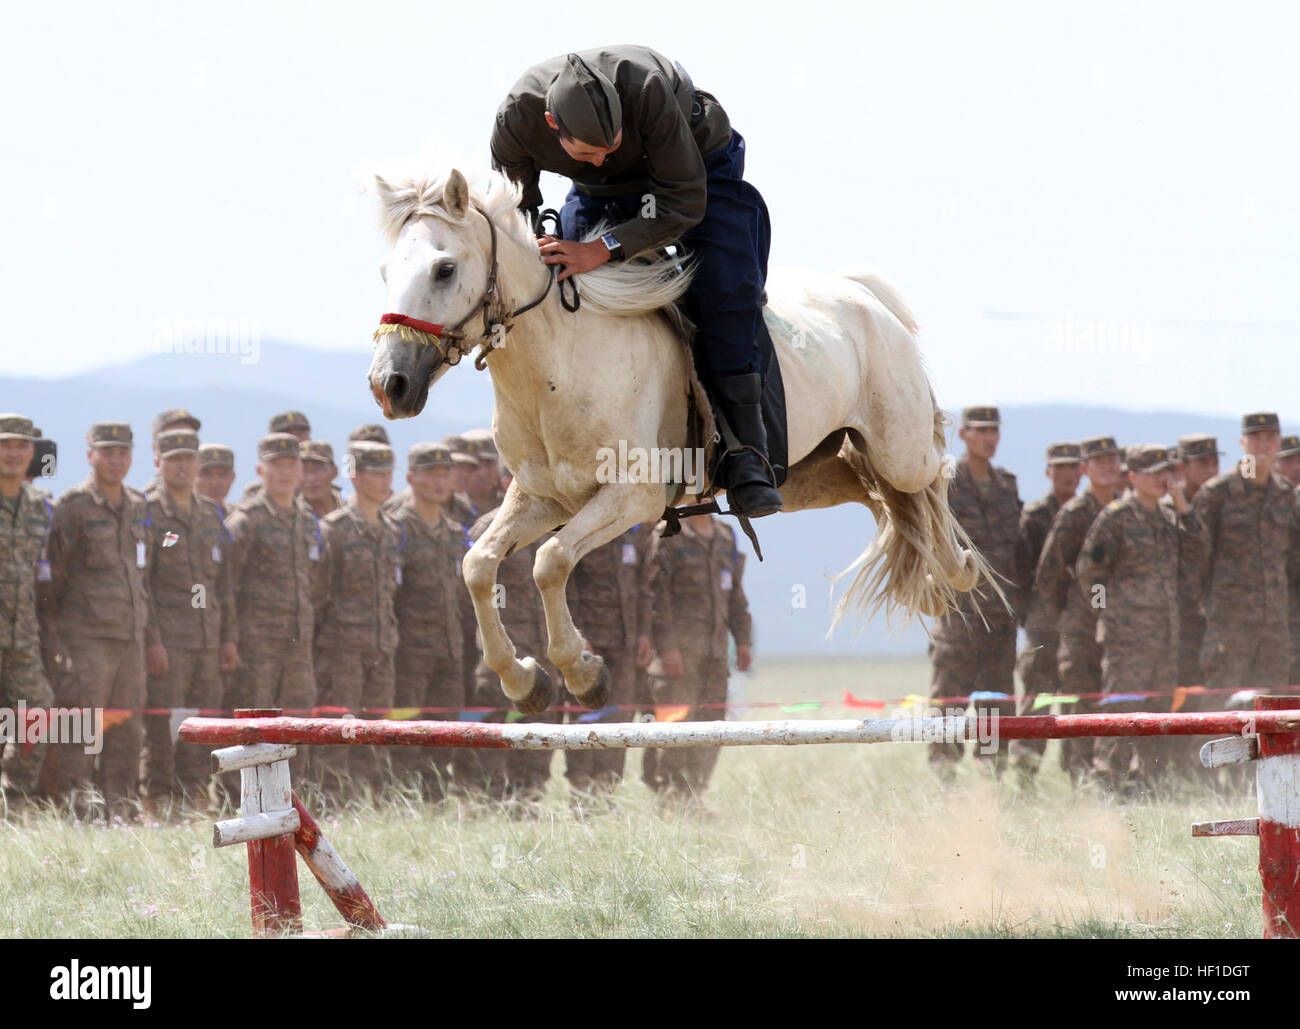 A member of the Mongolian Armed Forces 234 Cavalry Unit, jumps his horse during the opening ceremony of Exercise Khaan Quest in Five Hills Training Area, Mongolia, Aug. 3, 2013. Khaan Quest is an annual multinational exercise sponsored by the U.S. and Mongolia, and it is designed to strengthen the capabilities of U.S., Mongolian and other nations' forces in international peace support operations.(U.S. Marine Corps Photo by Sgt John M. Ewald/released) Khaan Quest 2013 - Opening Ceremony 130803-M-DR618-137 Stock Photo